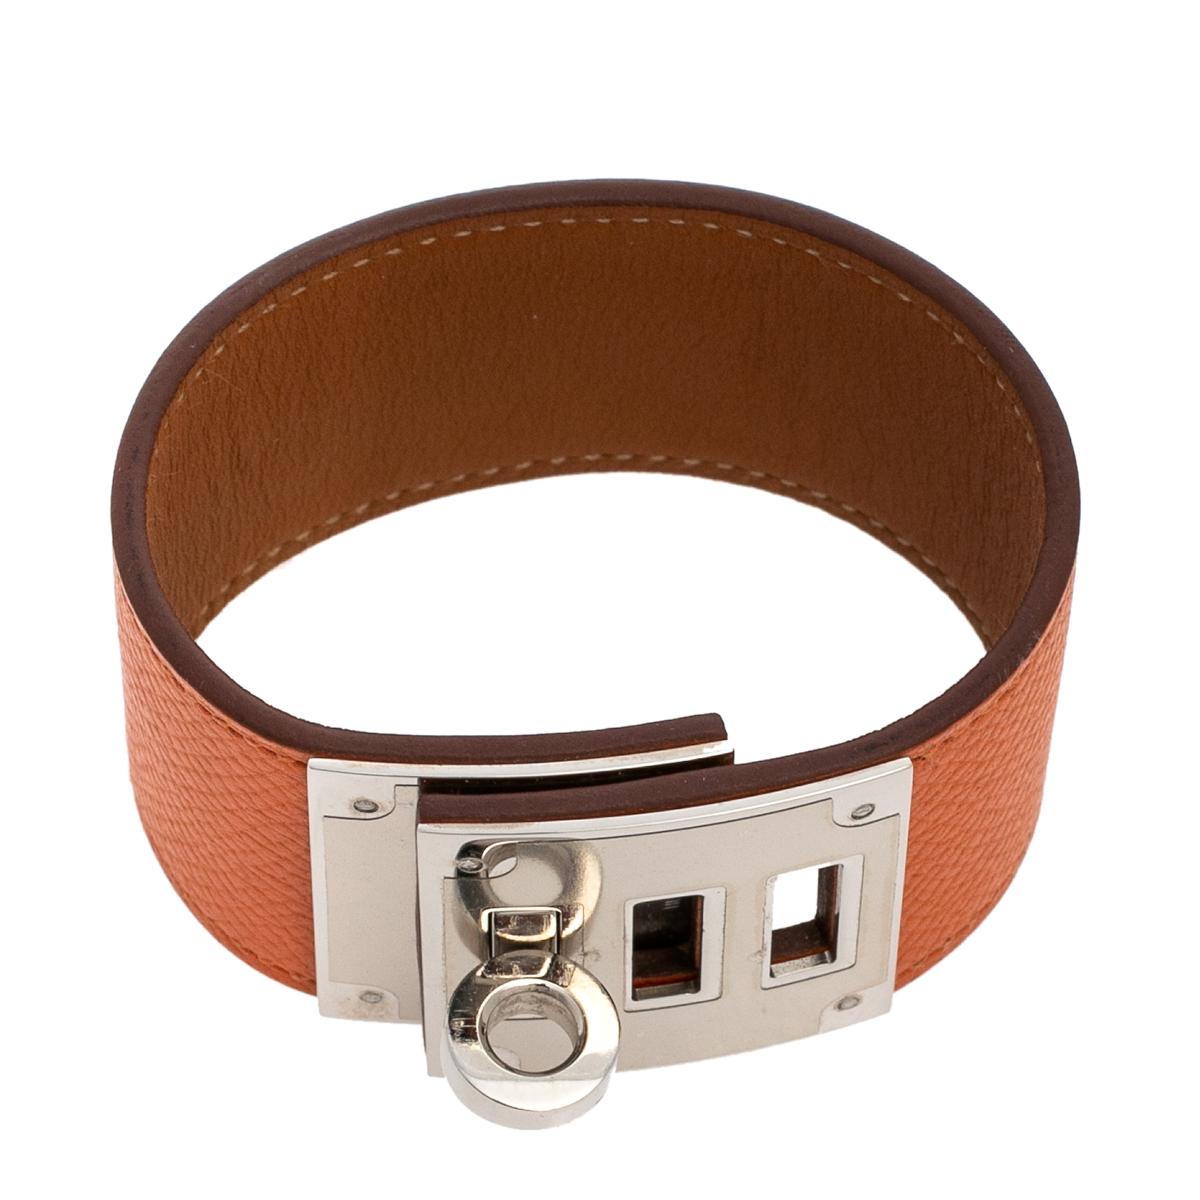 Hermes is a brand that epitomizes art and creativity. Designed to wrap around your wrist, this bracelet has been crafted in France from quality leather and decorated with palladium-plated metal. It is completed with the signature Kelly twist lock